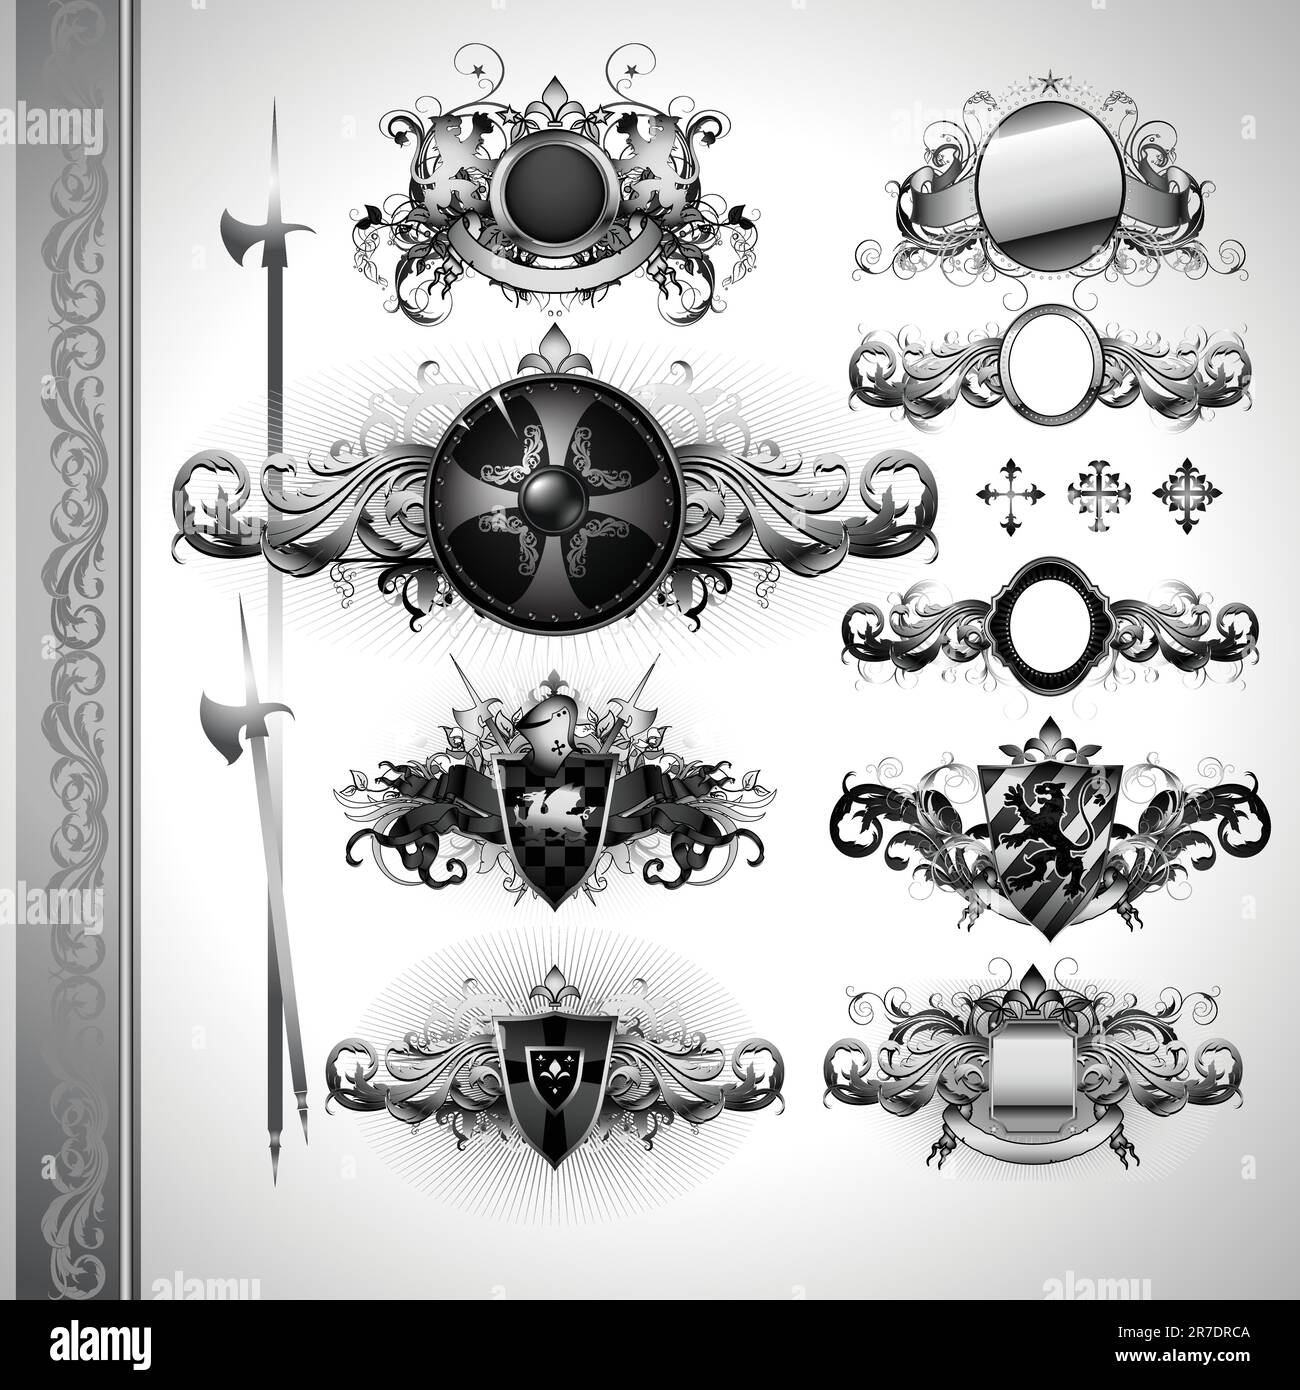 medieval heraldry shields, this illustration may be useful as designer work Stock Vector